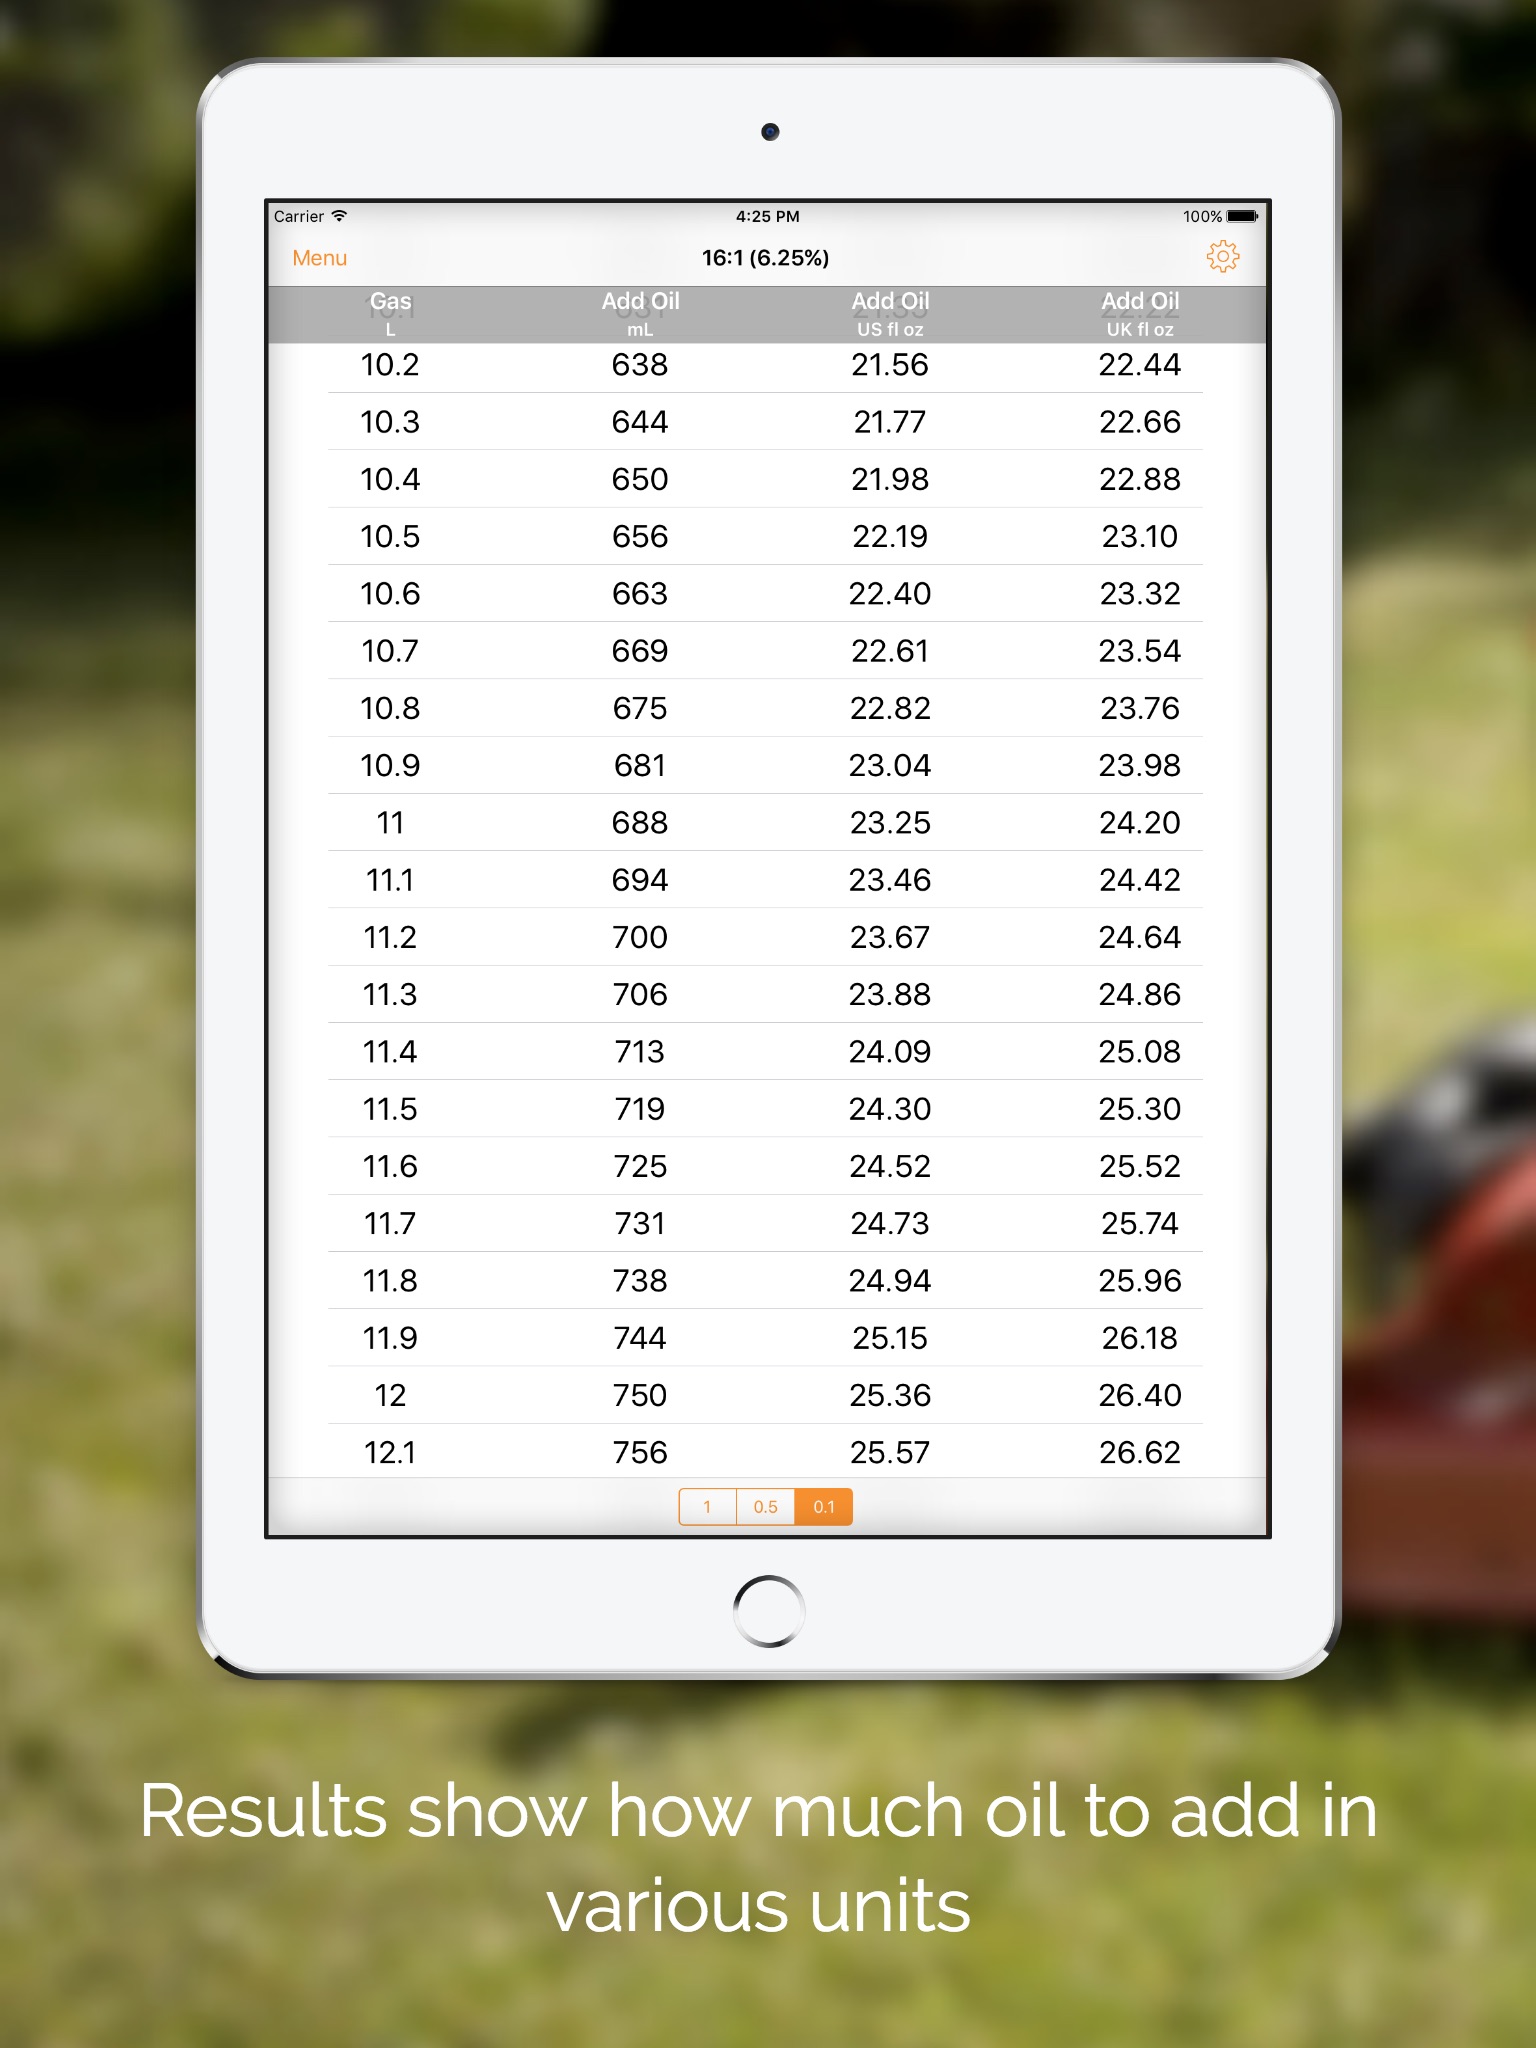 Premix Gas Ratios - Oil and Gas Mix for Two-Stroke screenshot 4